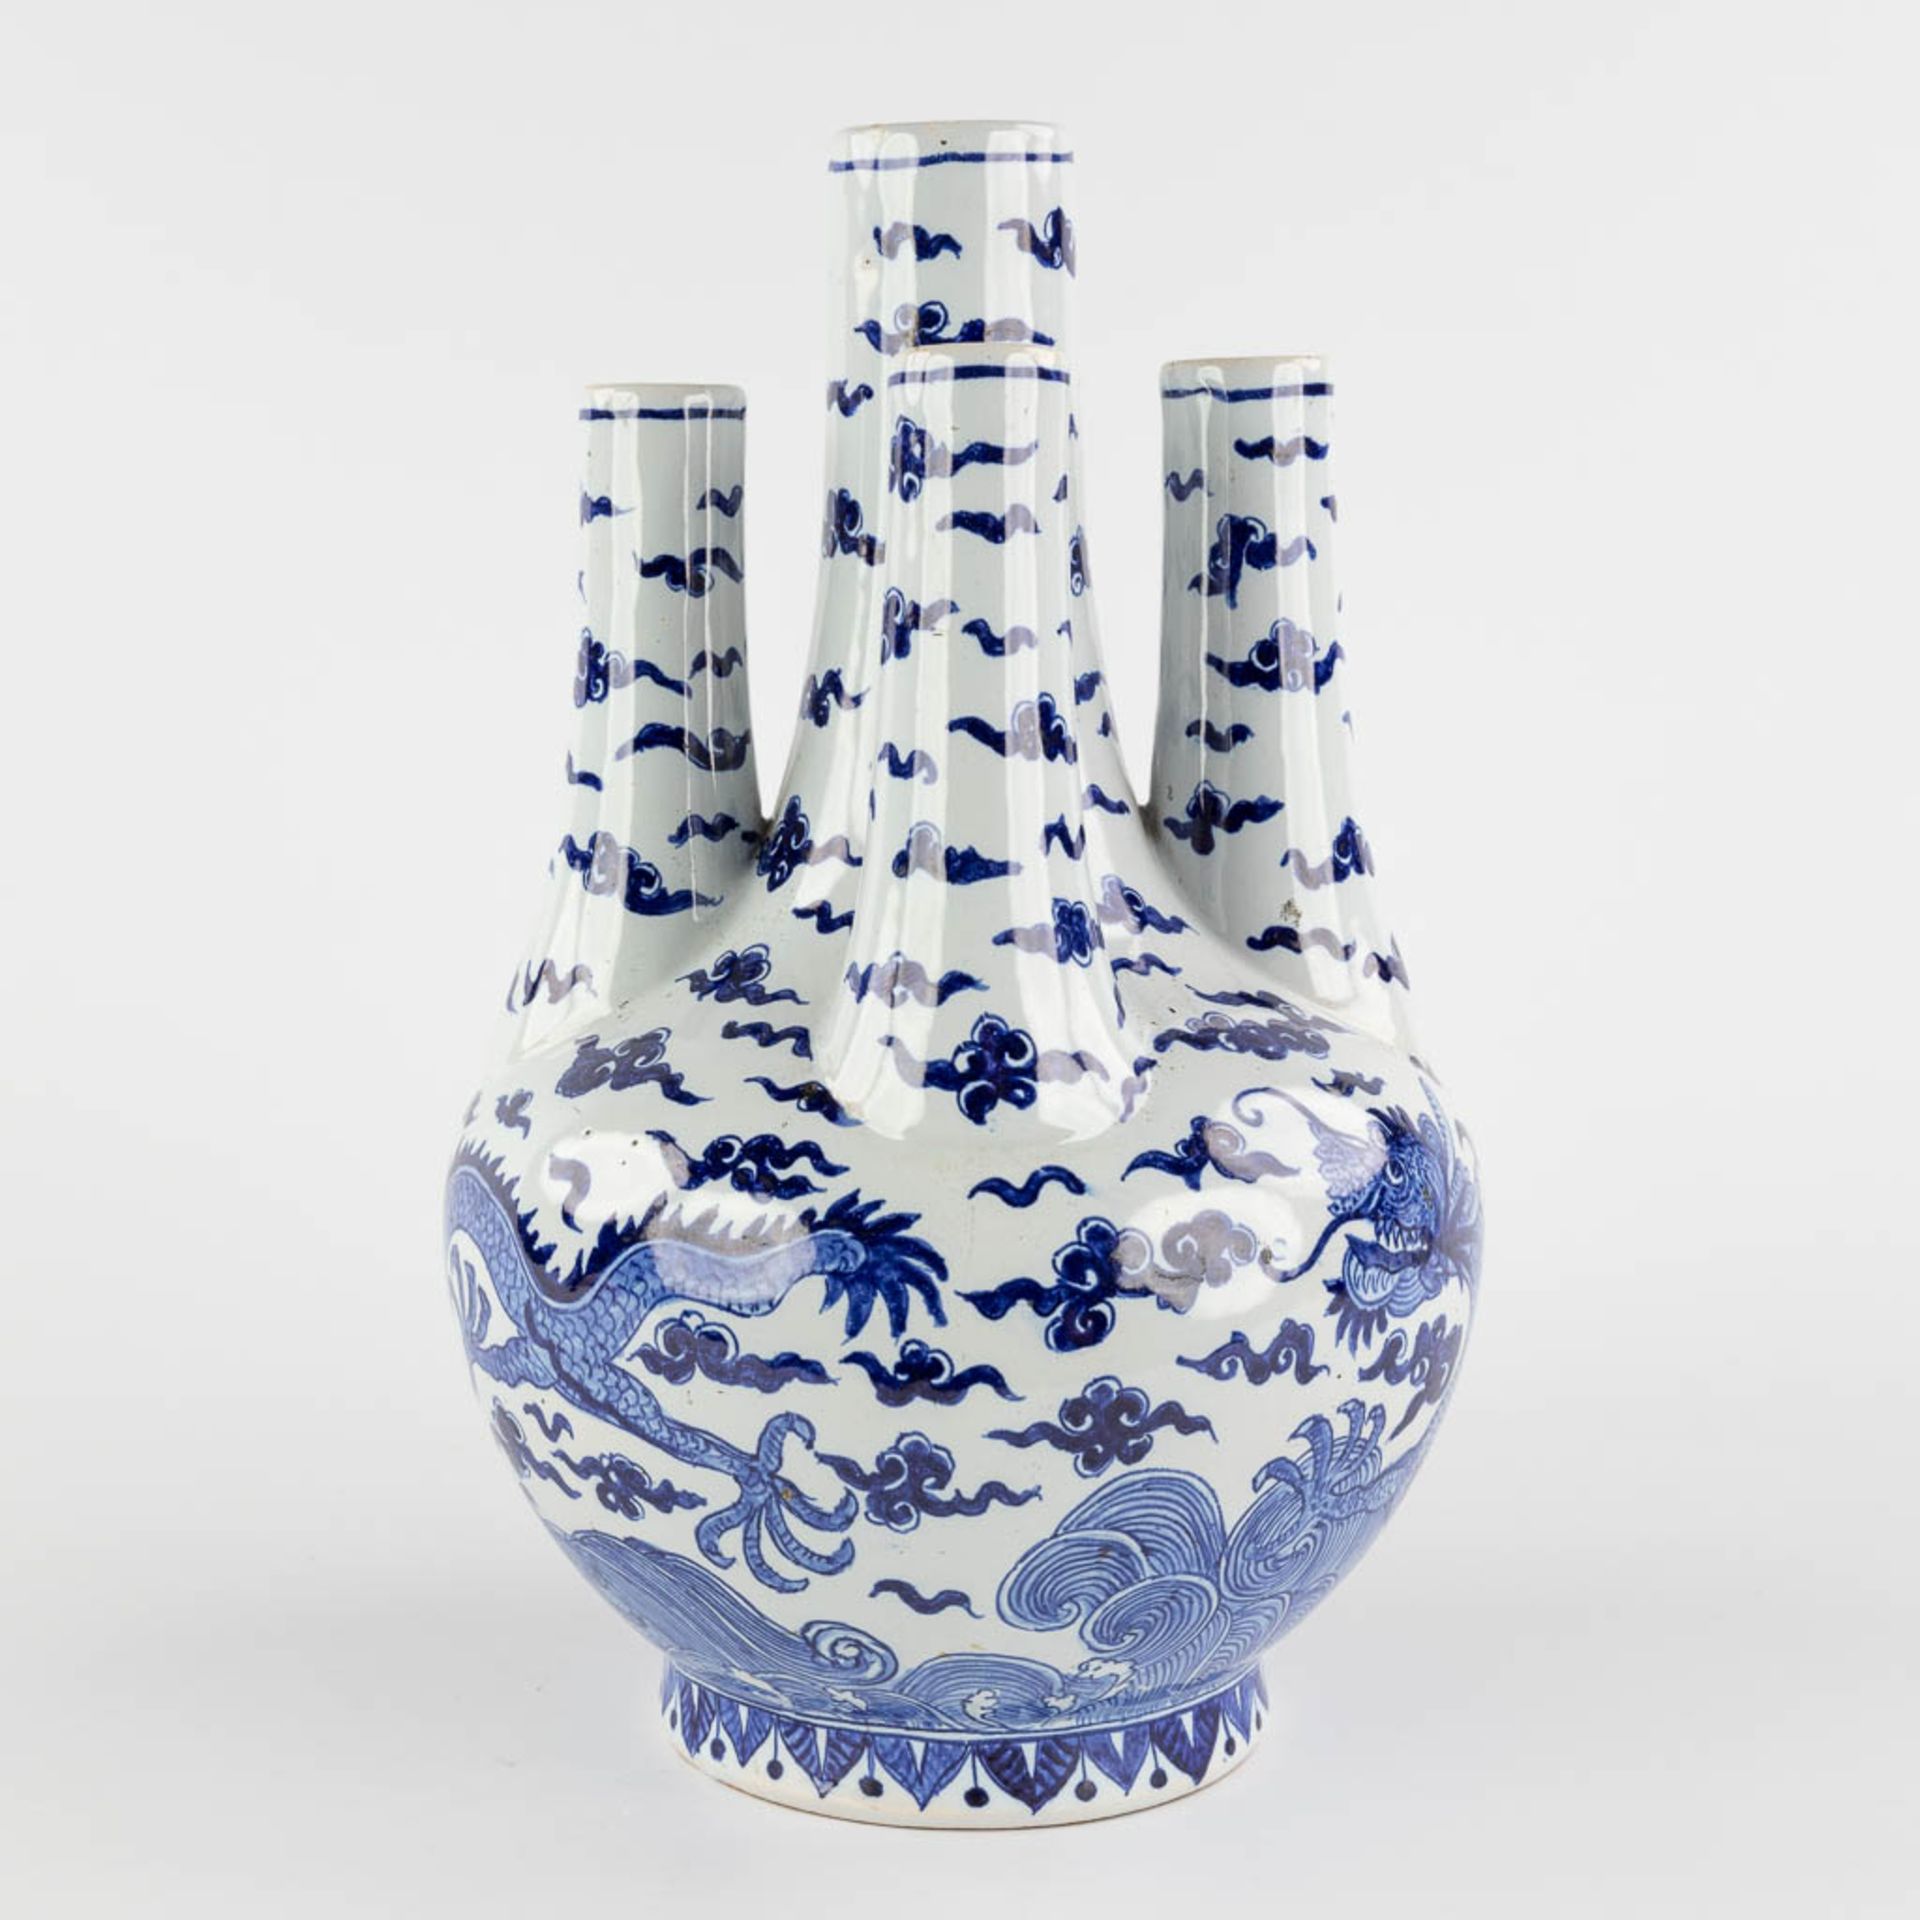 Charles-François Fourmaintraux-Courquin, a tulip vase with Chinoiserie dragon decor France. 19th C. - Image 7 of 15